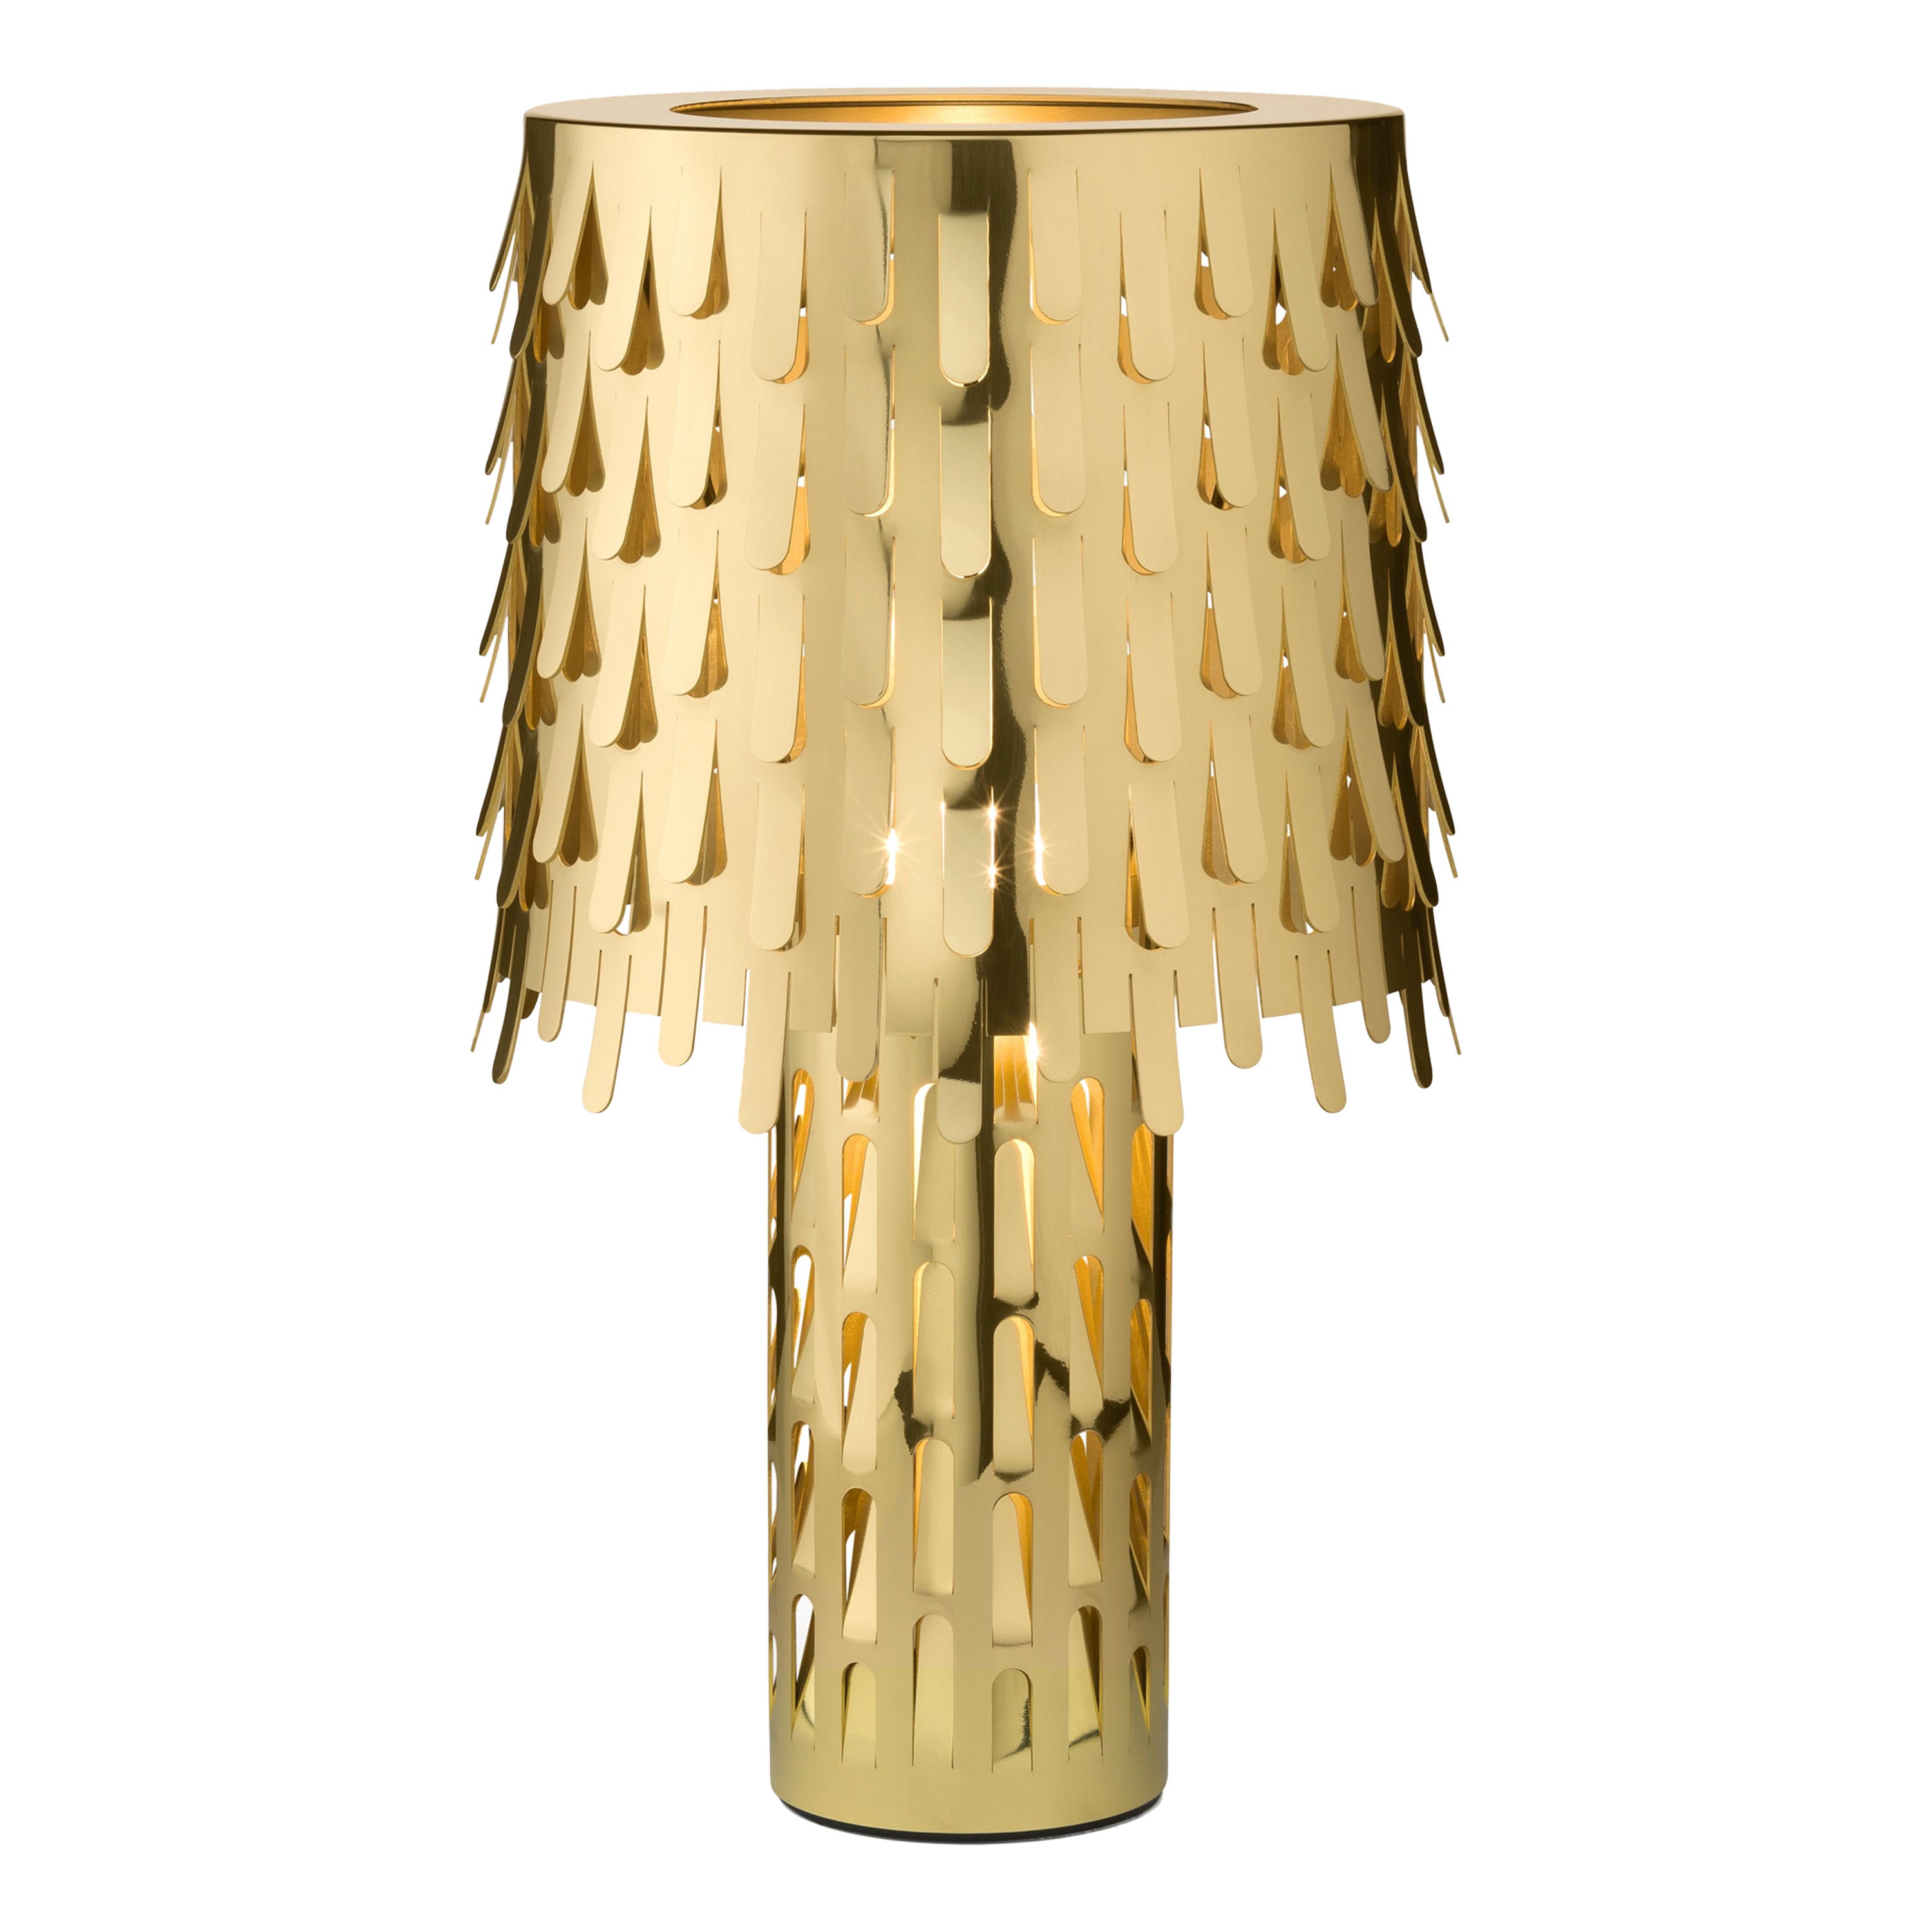 Ghidini 1961 Jackfruit Table Lamp in Polished Brass by Campana Brothers For Sale